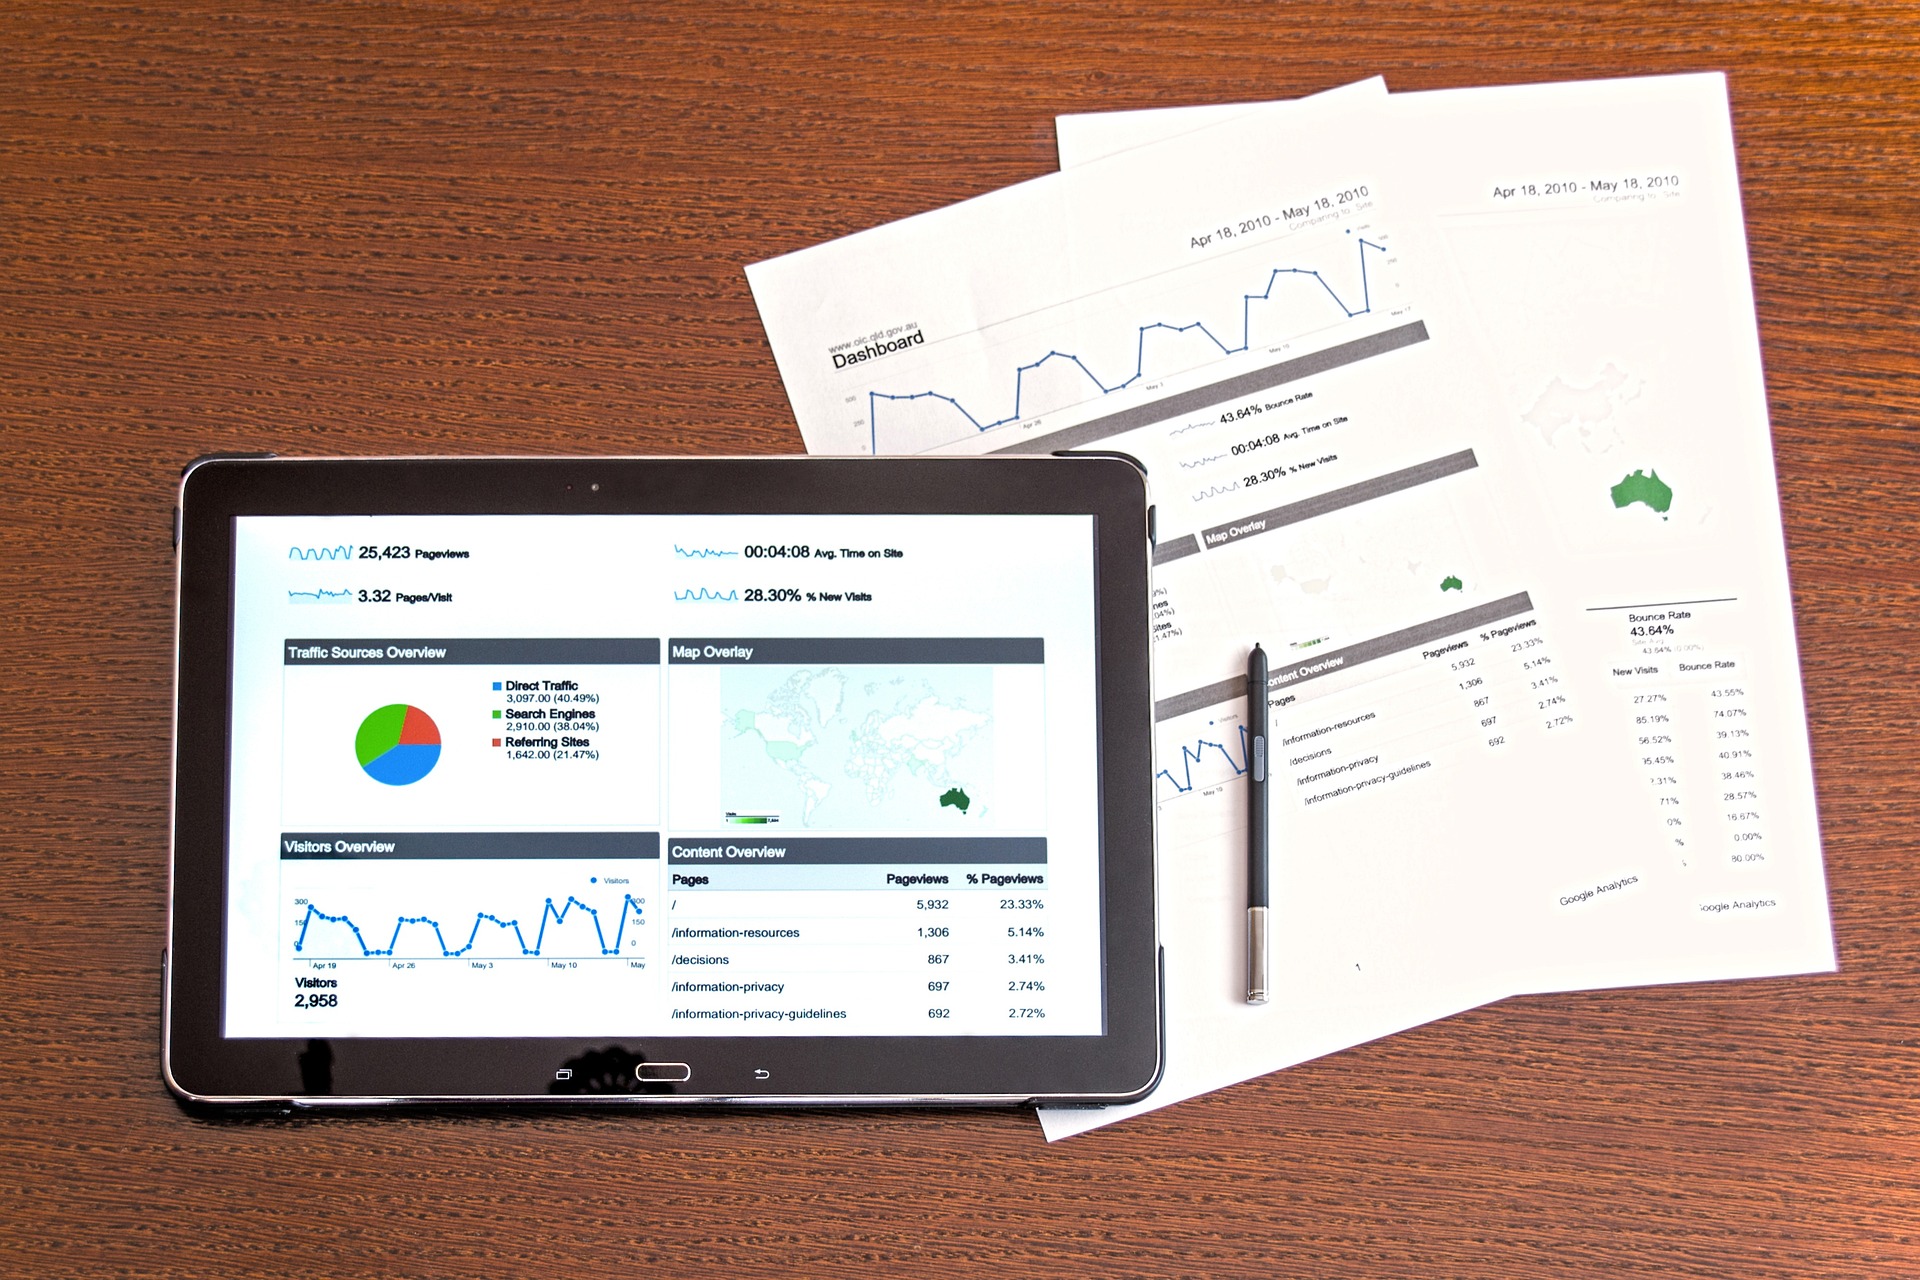 Tablet and two pieces of paper with business performance data on wood table